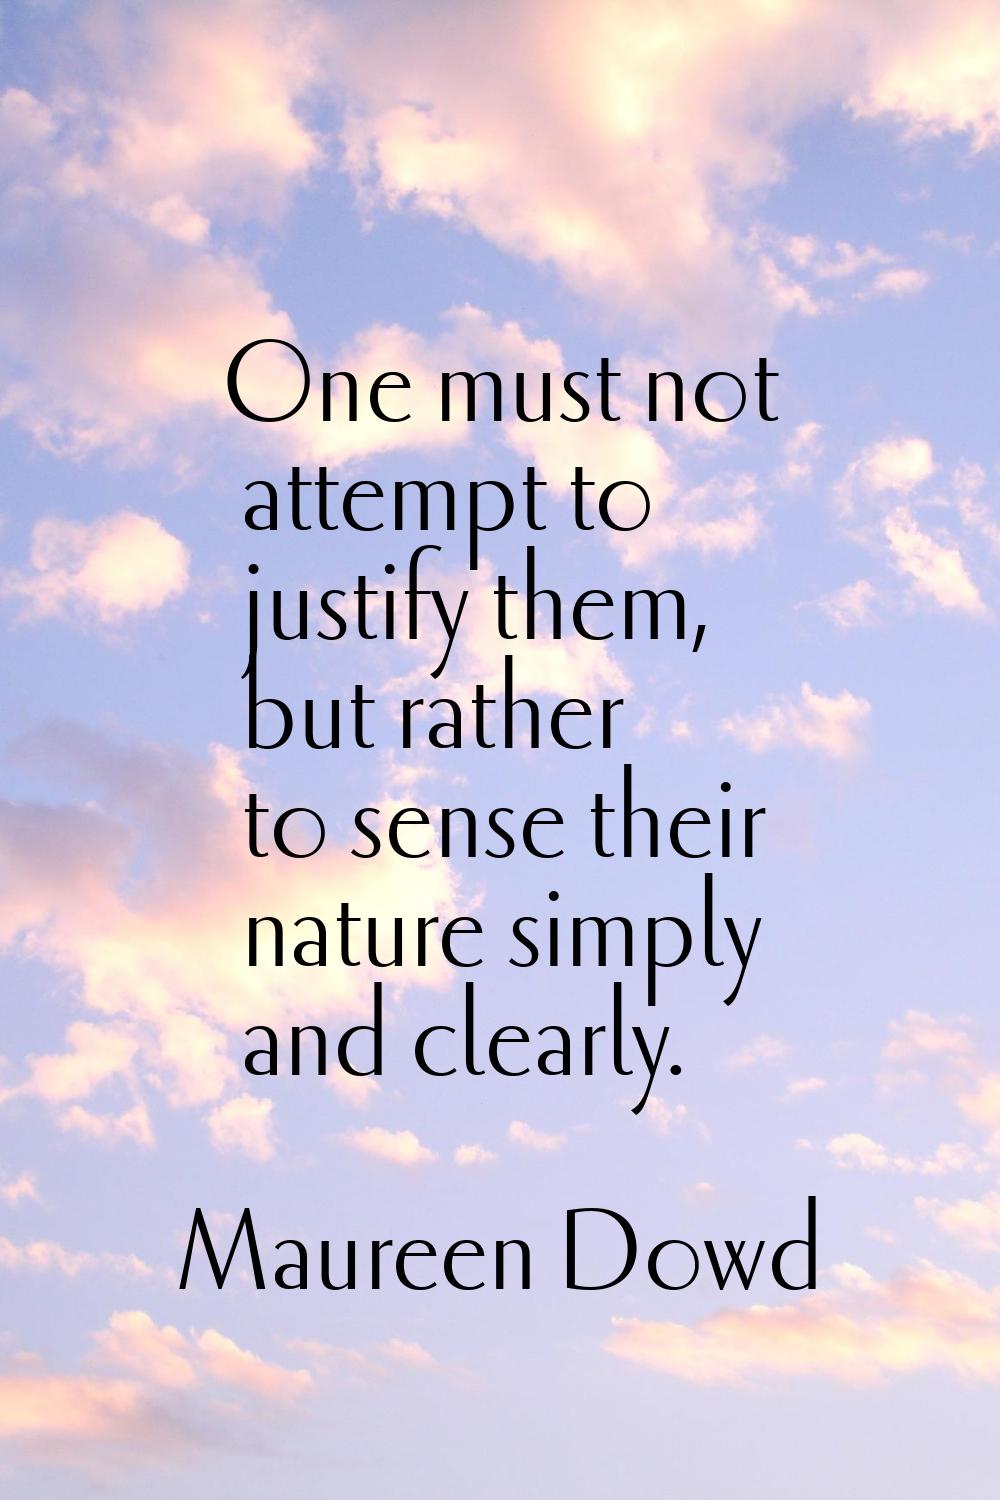 One must not attempt to justify them, but rather to sense their nature simply and clearly.